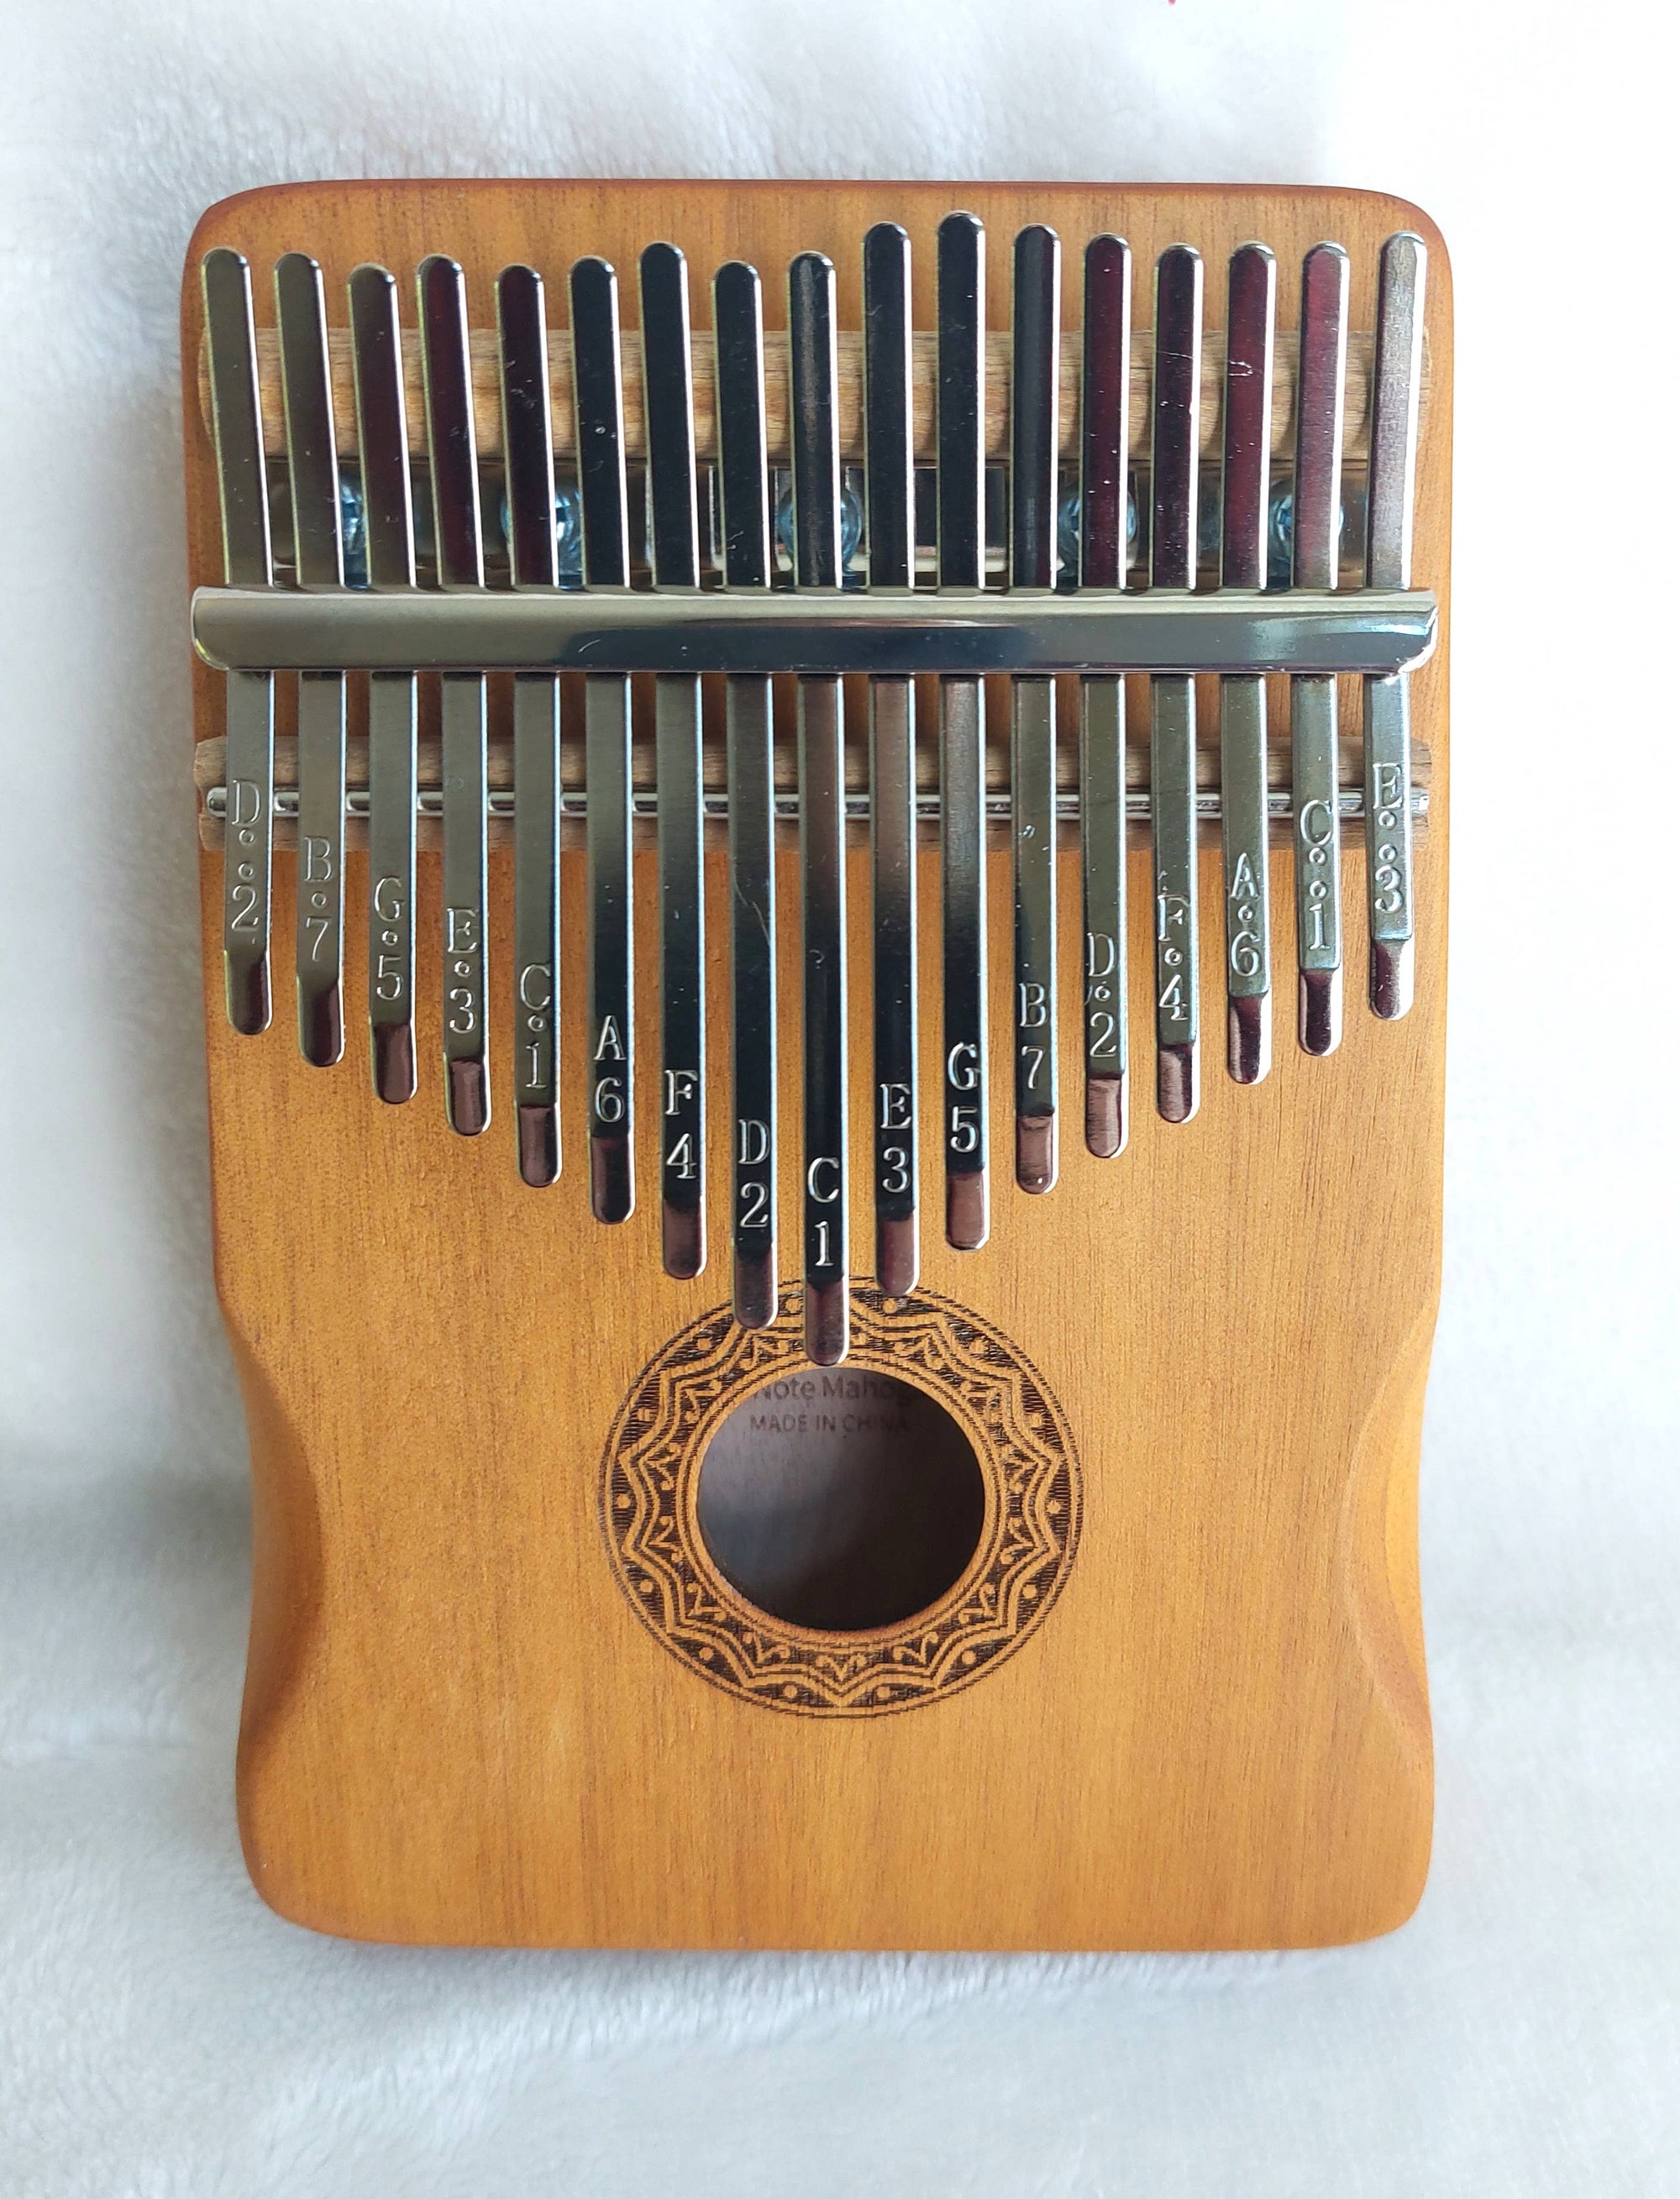 A Kalimba Musical Instrument, a musical instrument with metal tines labeled with notes, set on a wooden body with a central sound hole.